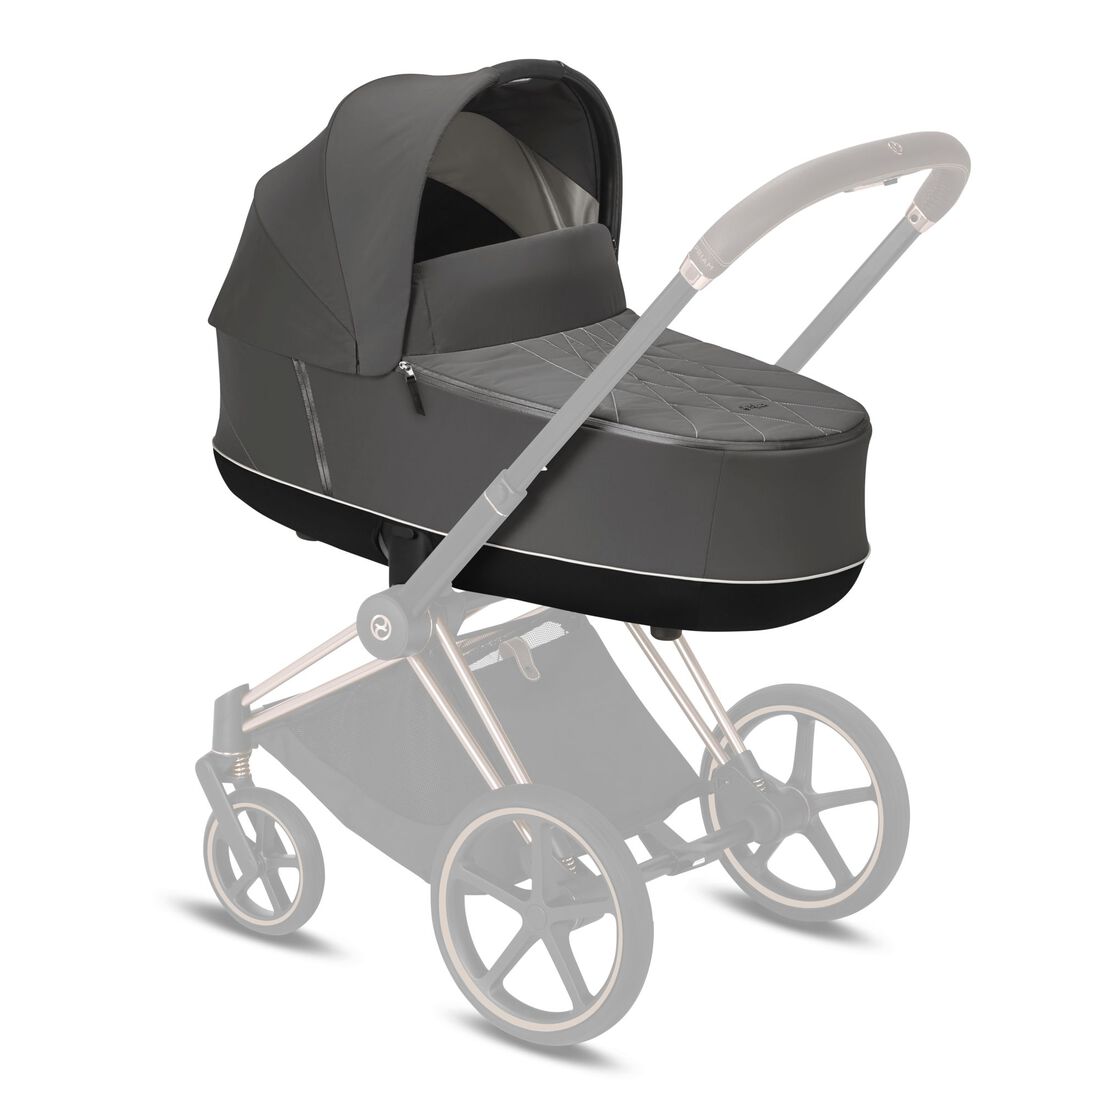 CYBEX Priam 3 Lux Carry Cot - Soho Grey in Soho Grey large image number 5